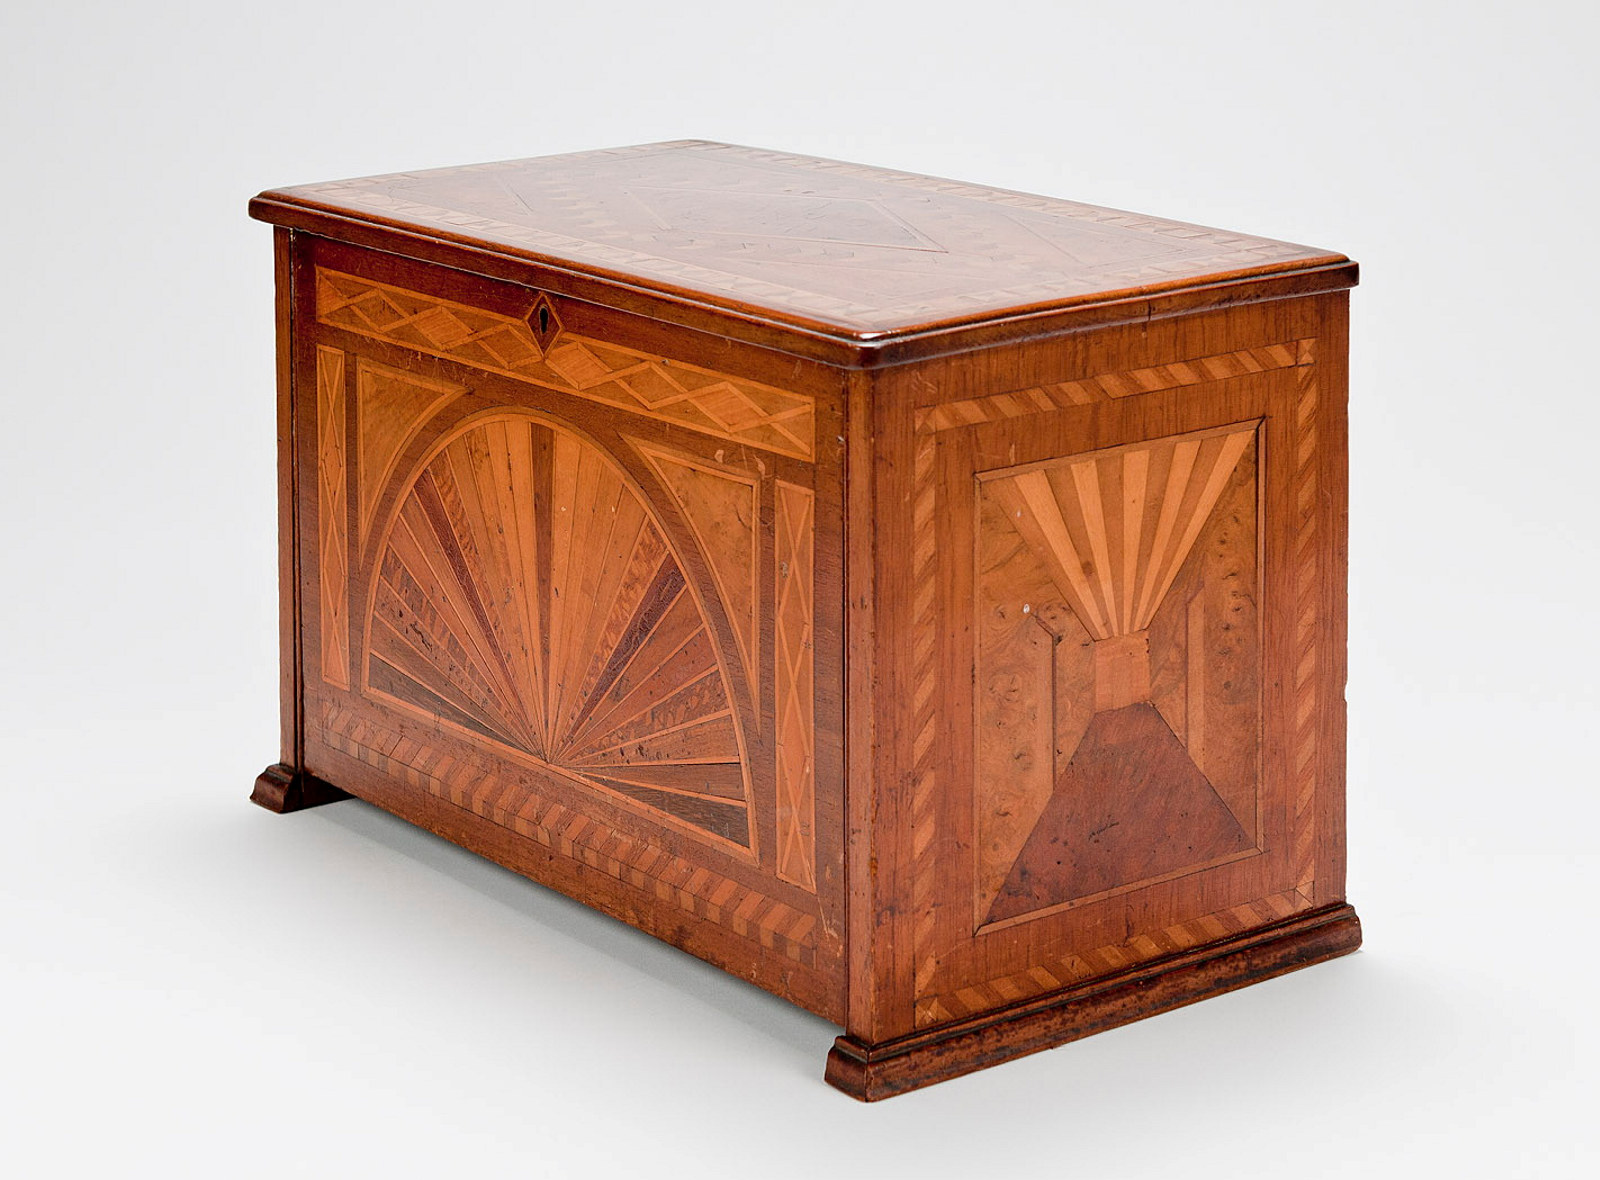 Wooden chest with inlaid pattern.